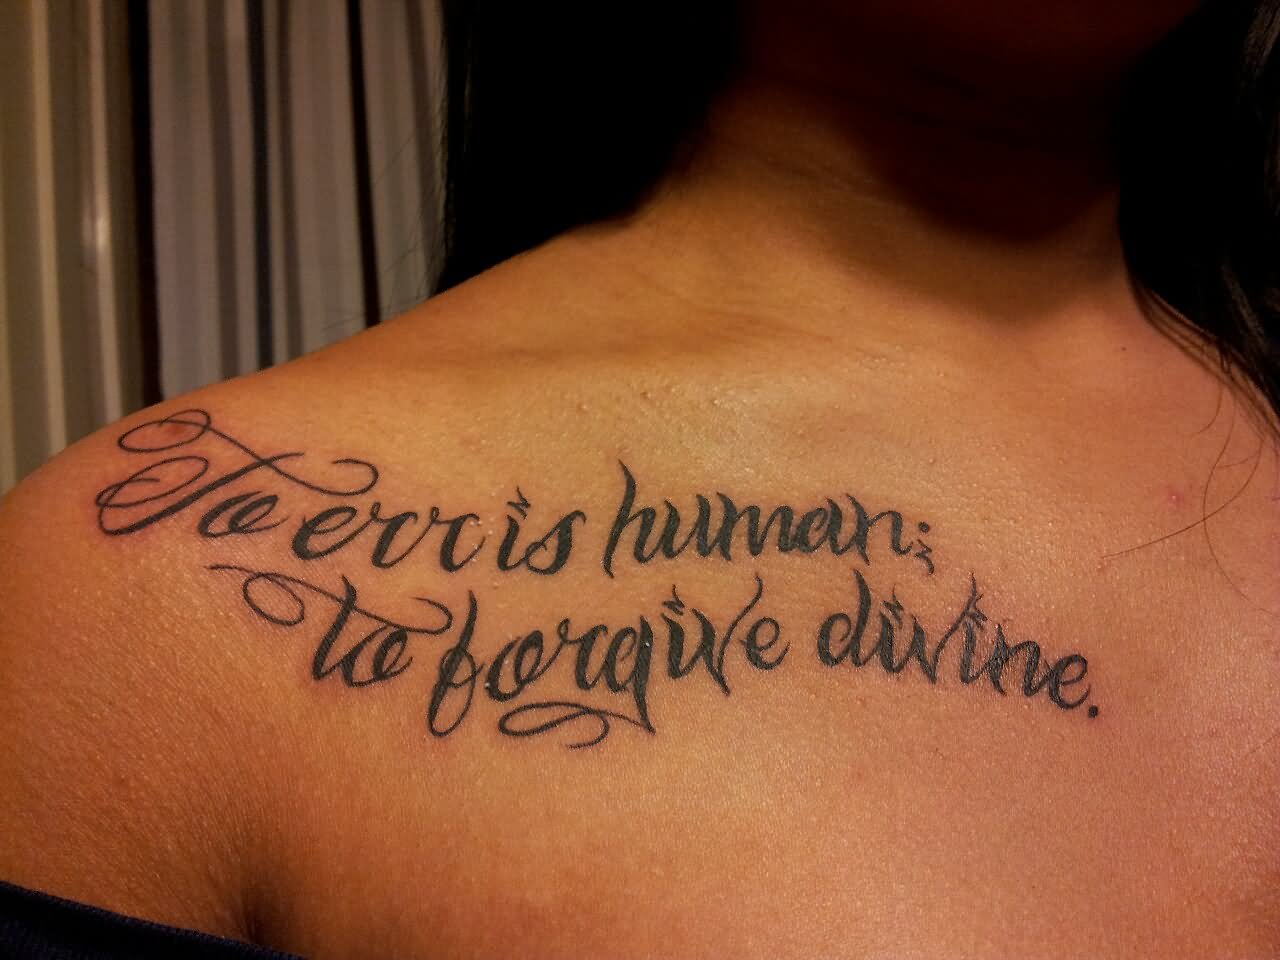 To Err Is Human Cancer Quote Tattoo On Front Shoulder